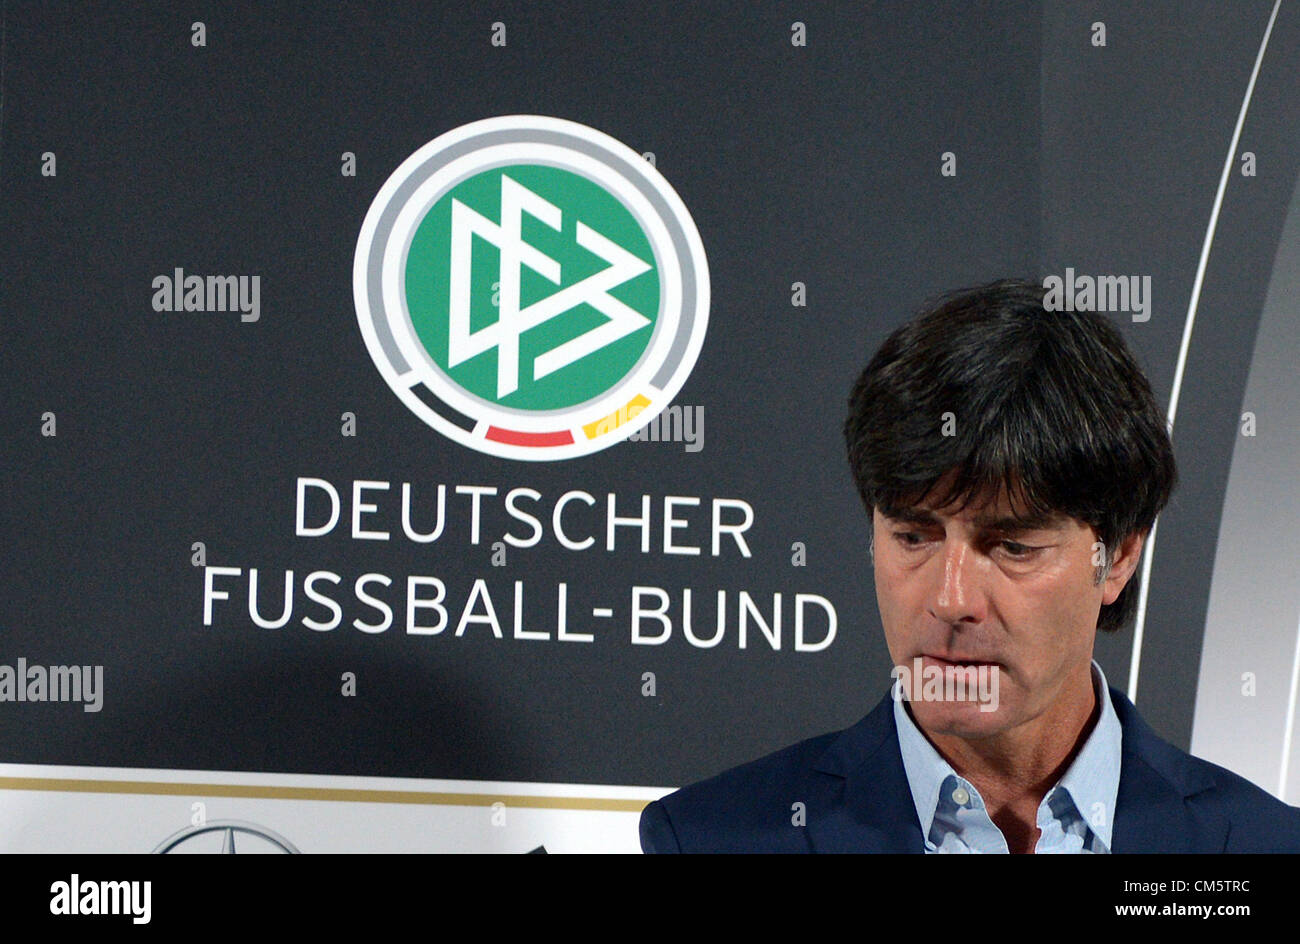 11.10.2012. Aviva Stadium, Dublin, Ireland.  Germany's head coach Joachim Loew takes part in a press conference at Aviva Stadium in Dublin, Ireland, 11 October 2012. The German national team will play a World Cup qualification match against Ireland on 12 October 2012. Stock Photo